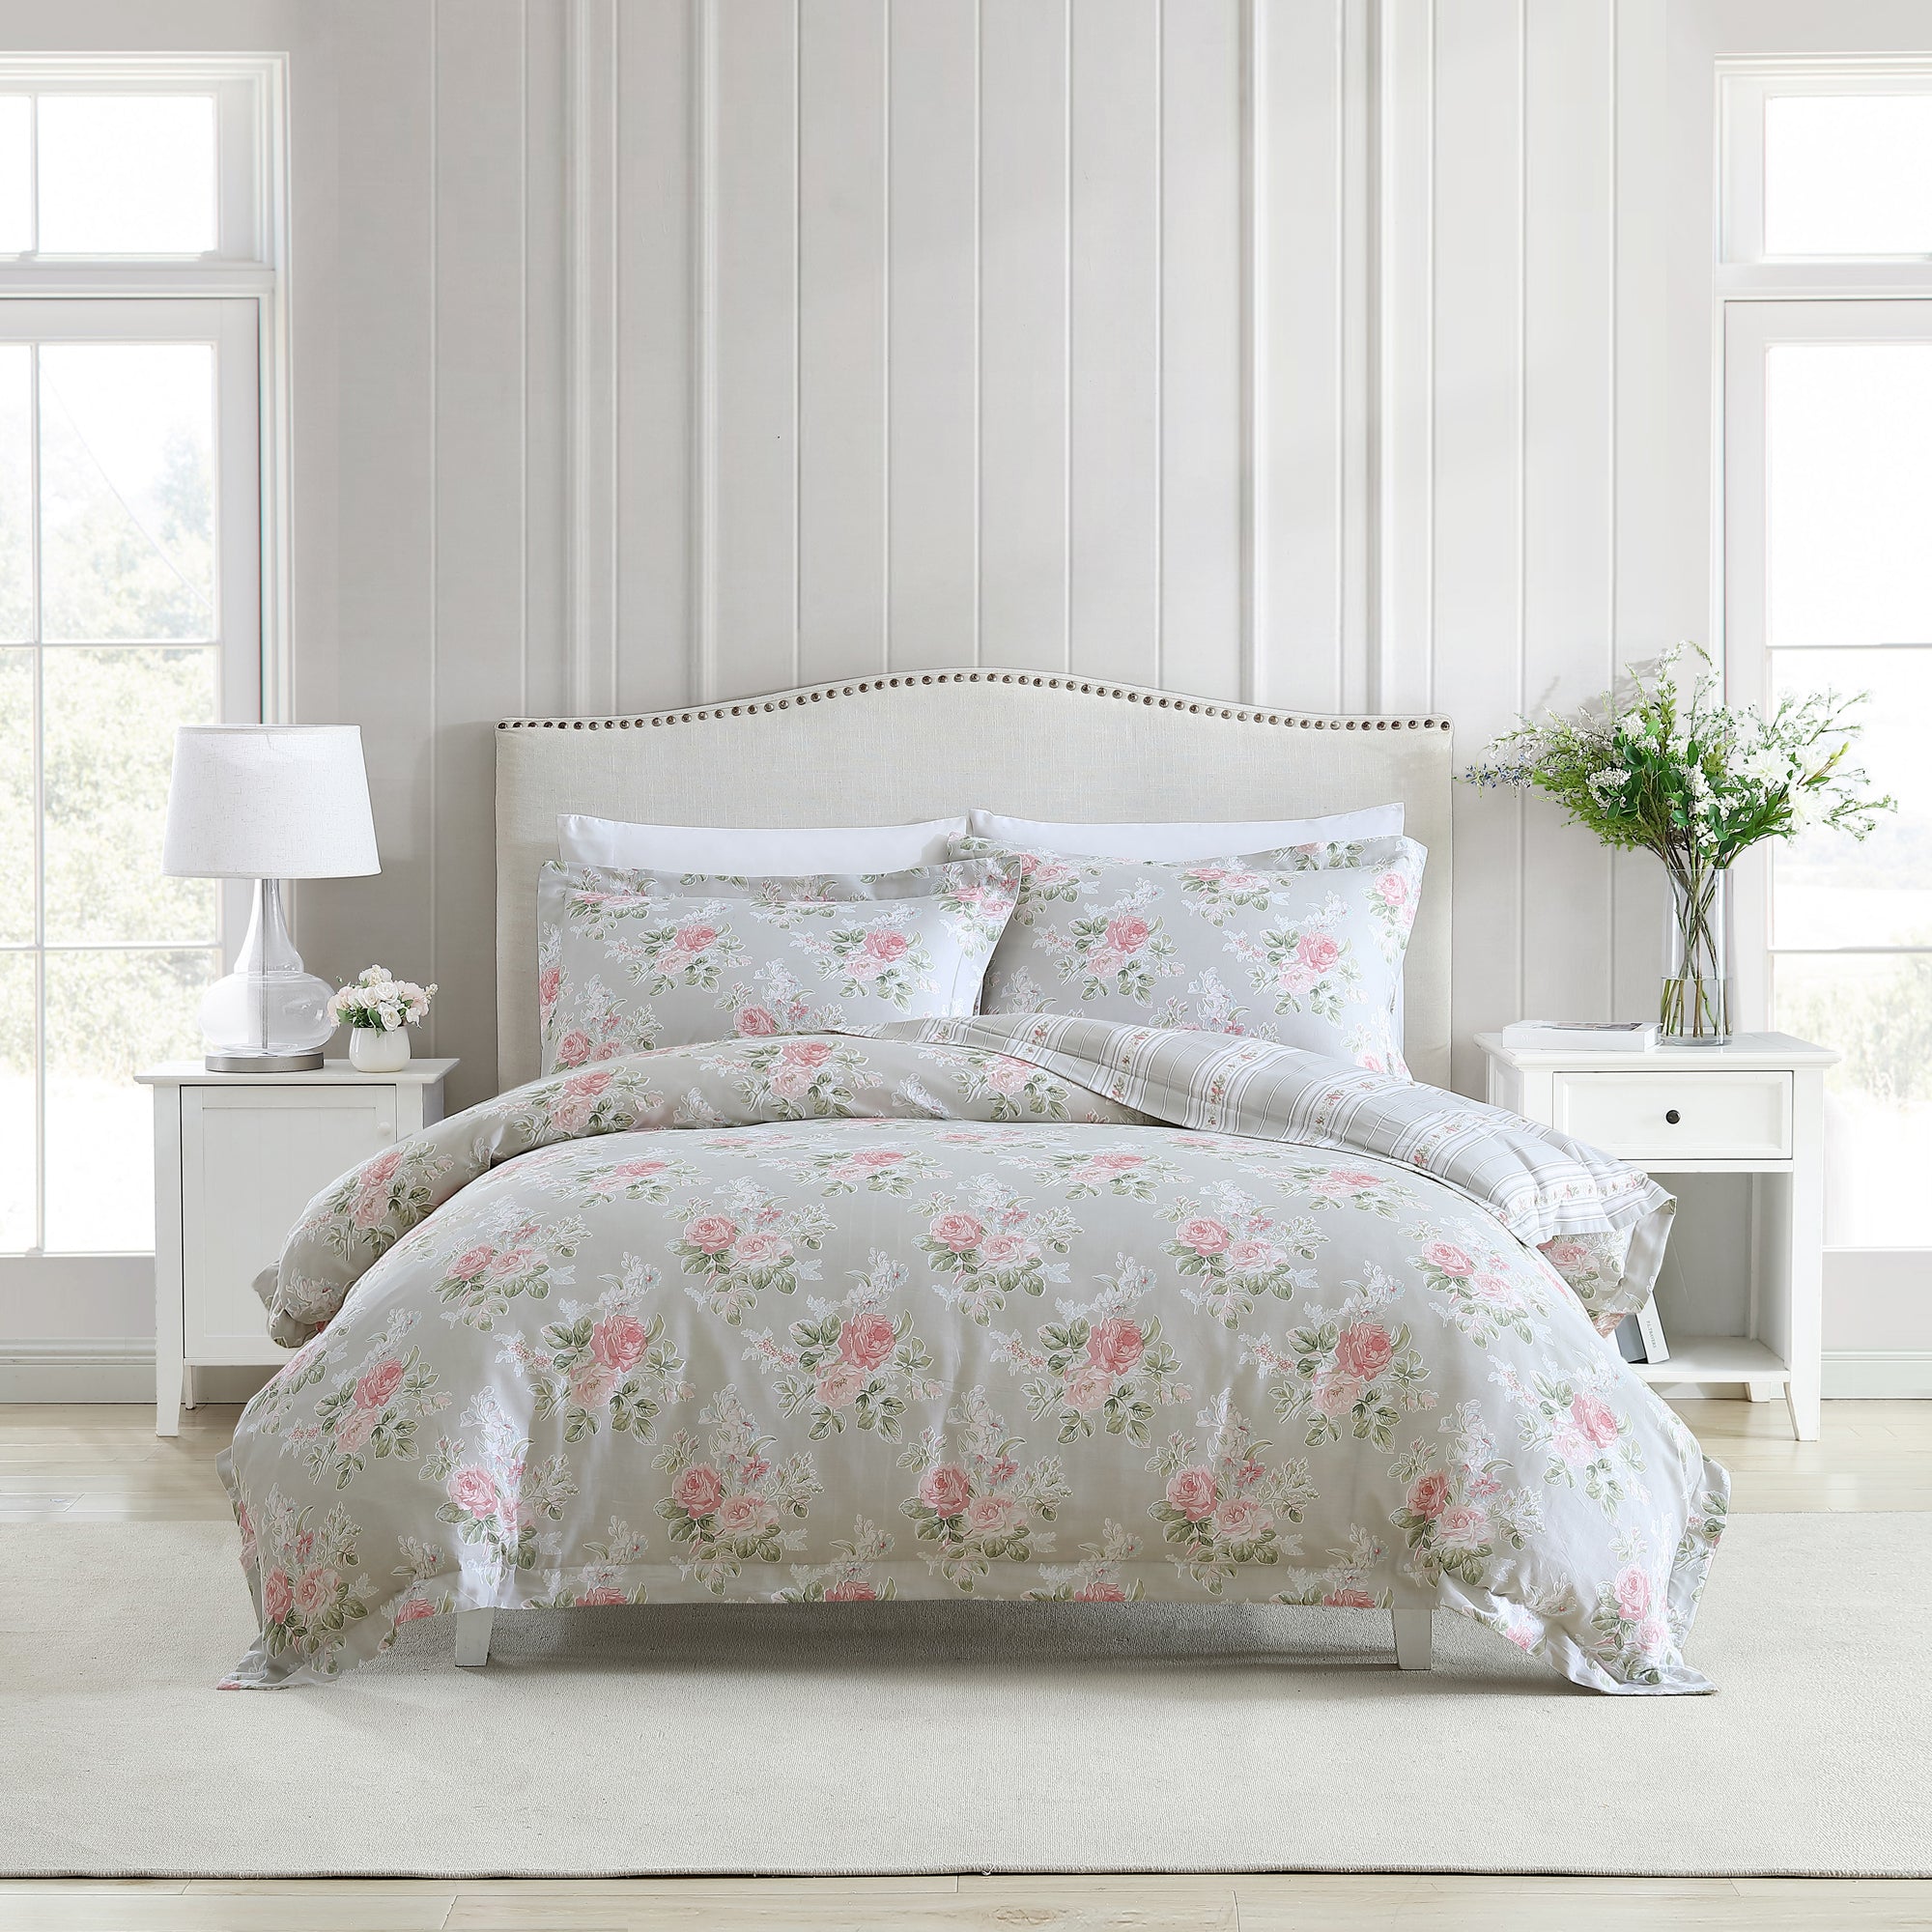 The Melany Quilt Cover Set Range Pink and Grey by Laura Ashley is constructed from 100% cotton sateen fabric. Transform your bedroom with this romantic rose design, pairing classic dove grey with a beautiful pop of pink. Featuring a tailored edge and coordinated with an elegant wallpaper stripe reverse, this timeless classic fits easily into any bedroom.